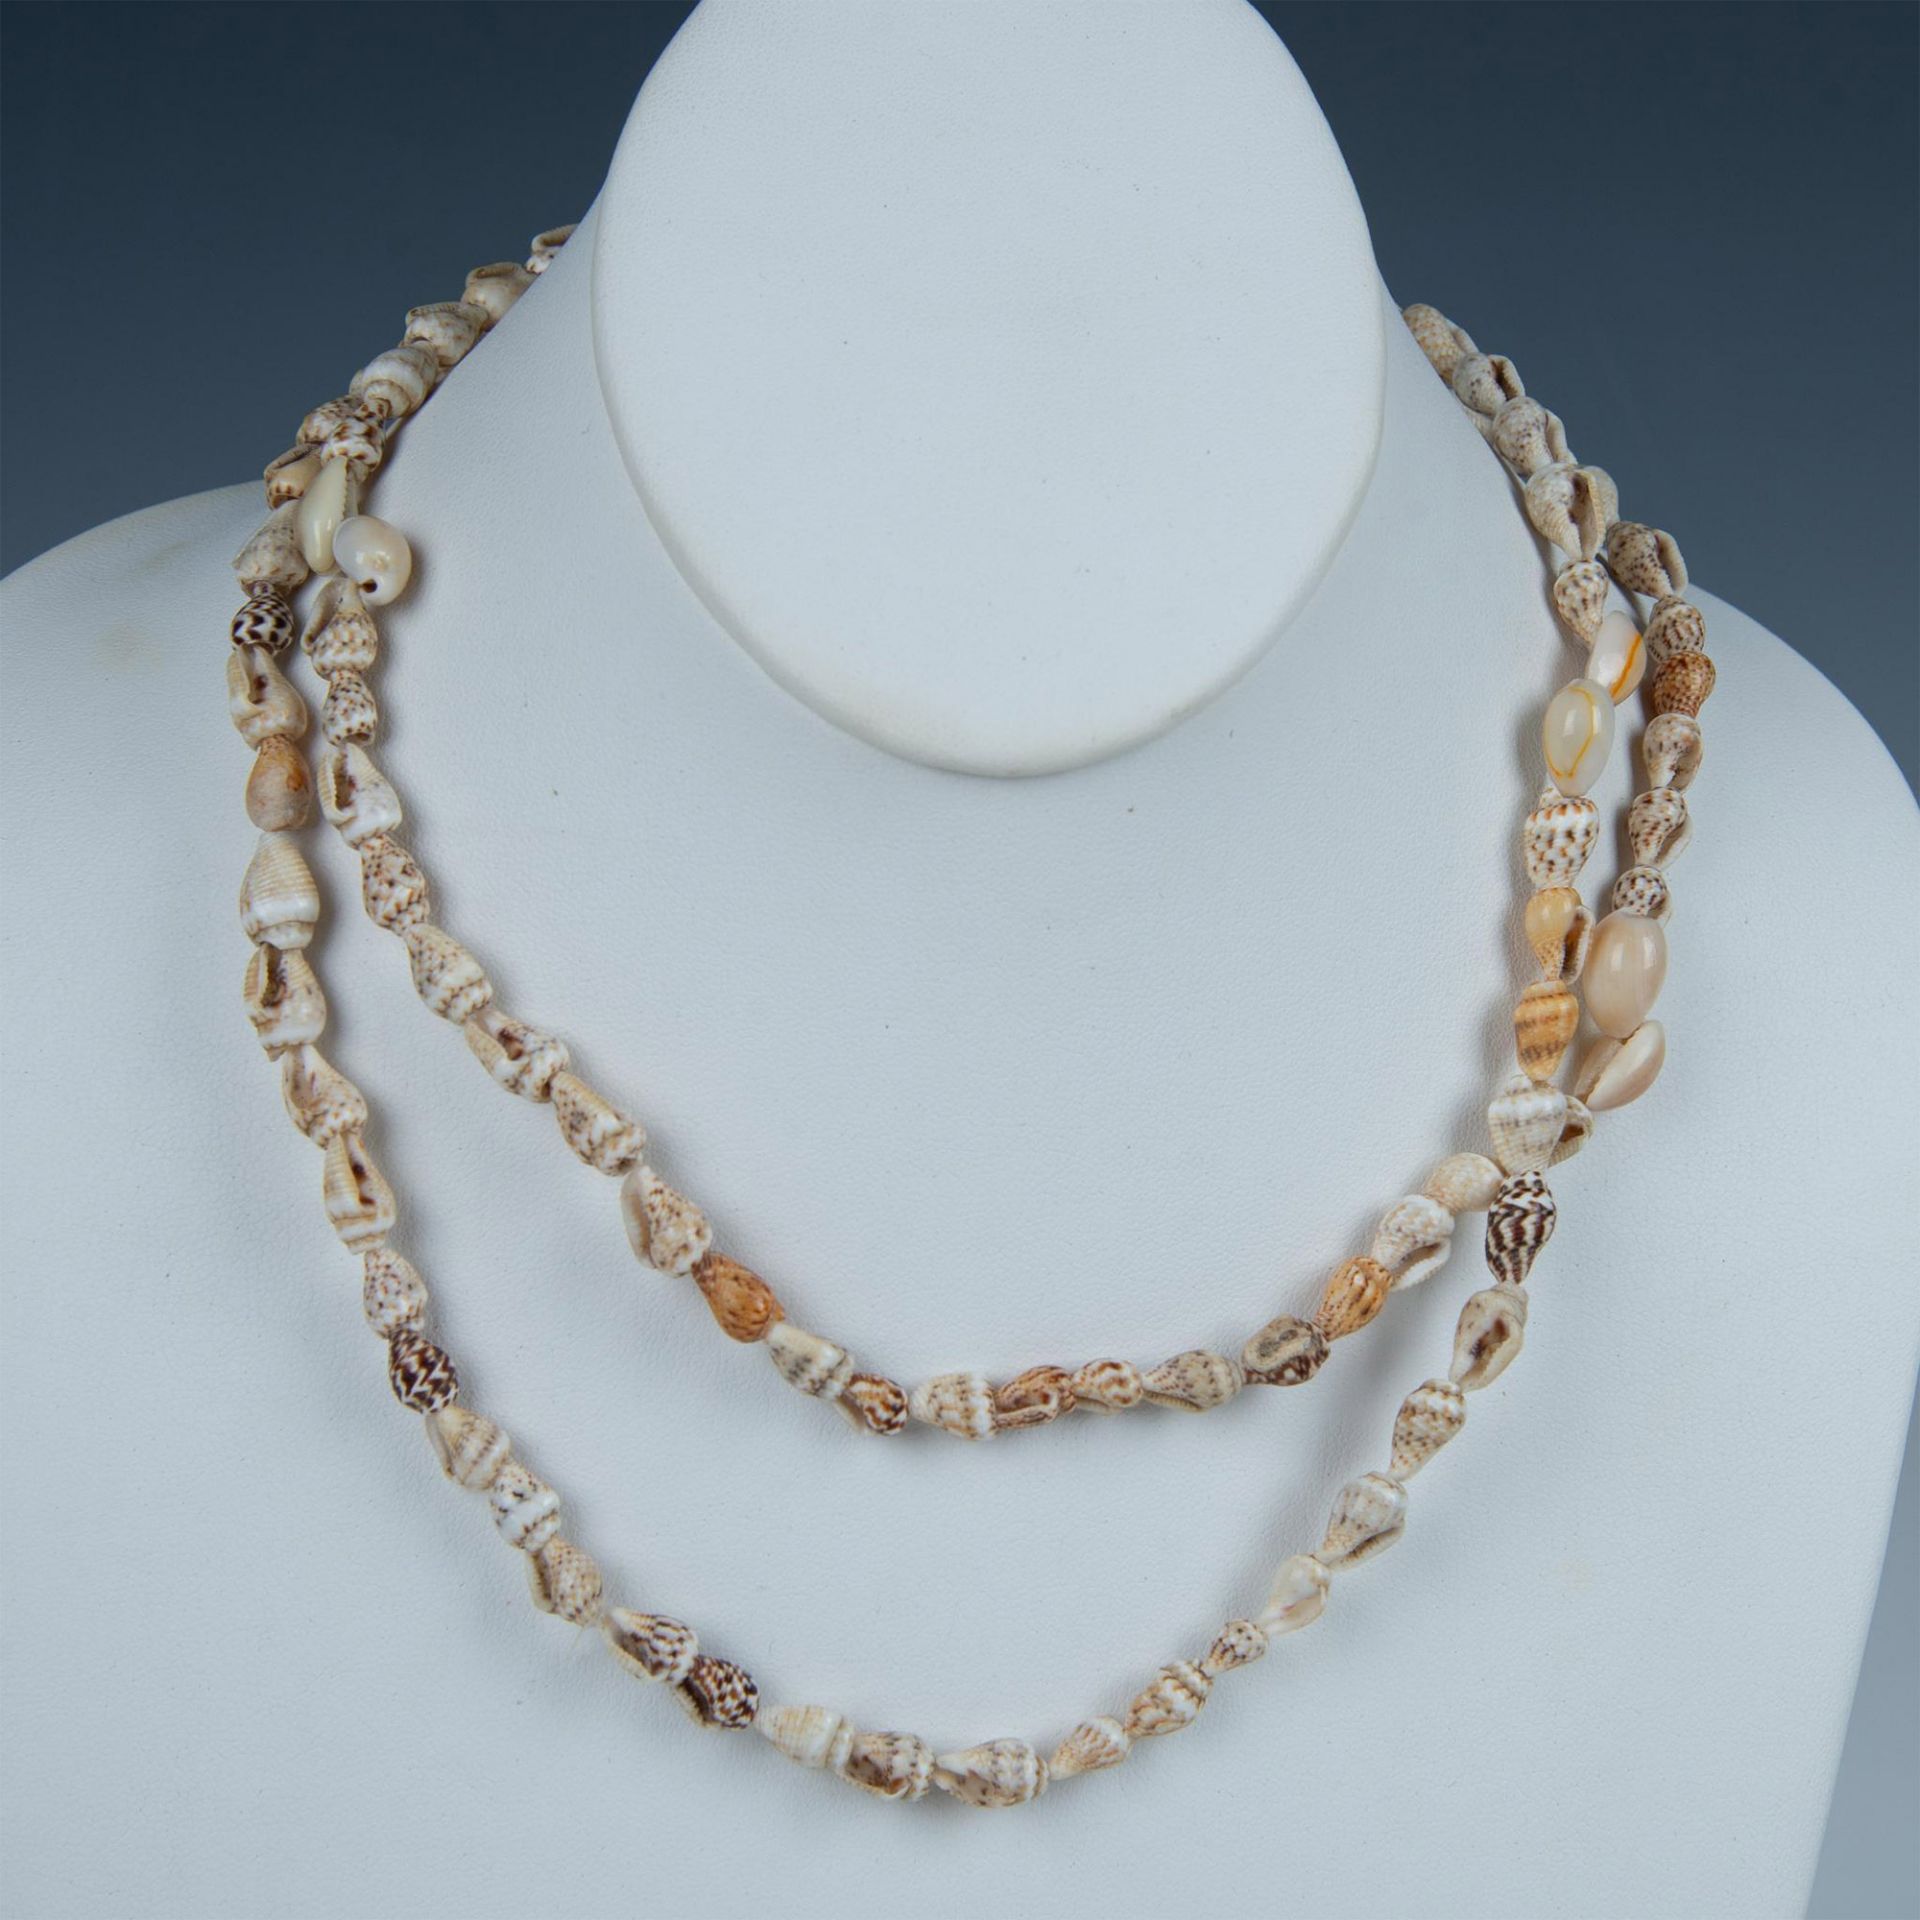 3pc Long Seashell Beach Necklaces - Image 2 of 4